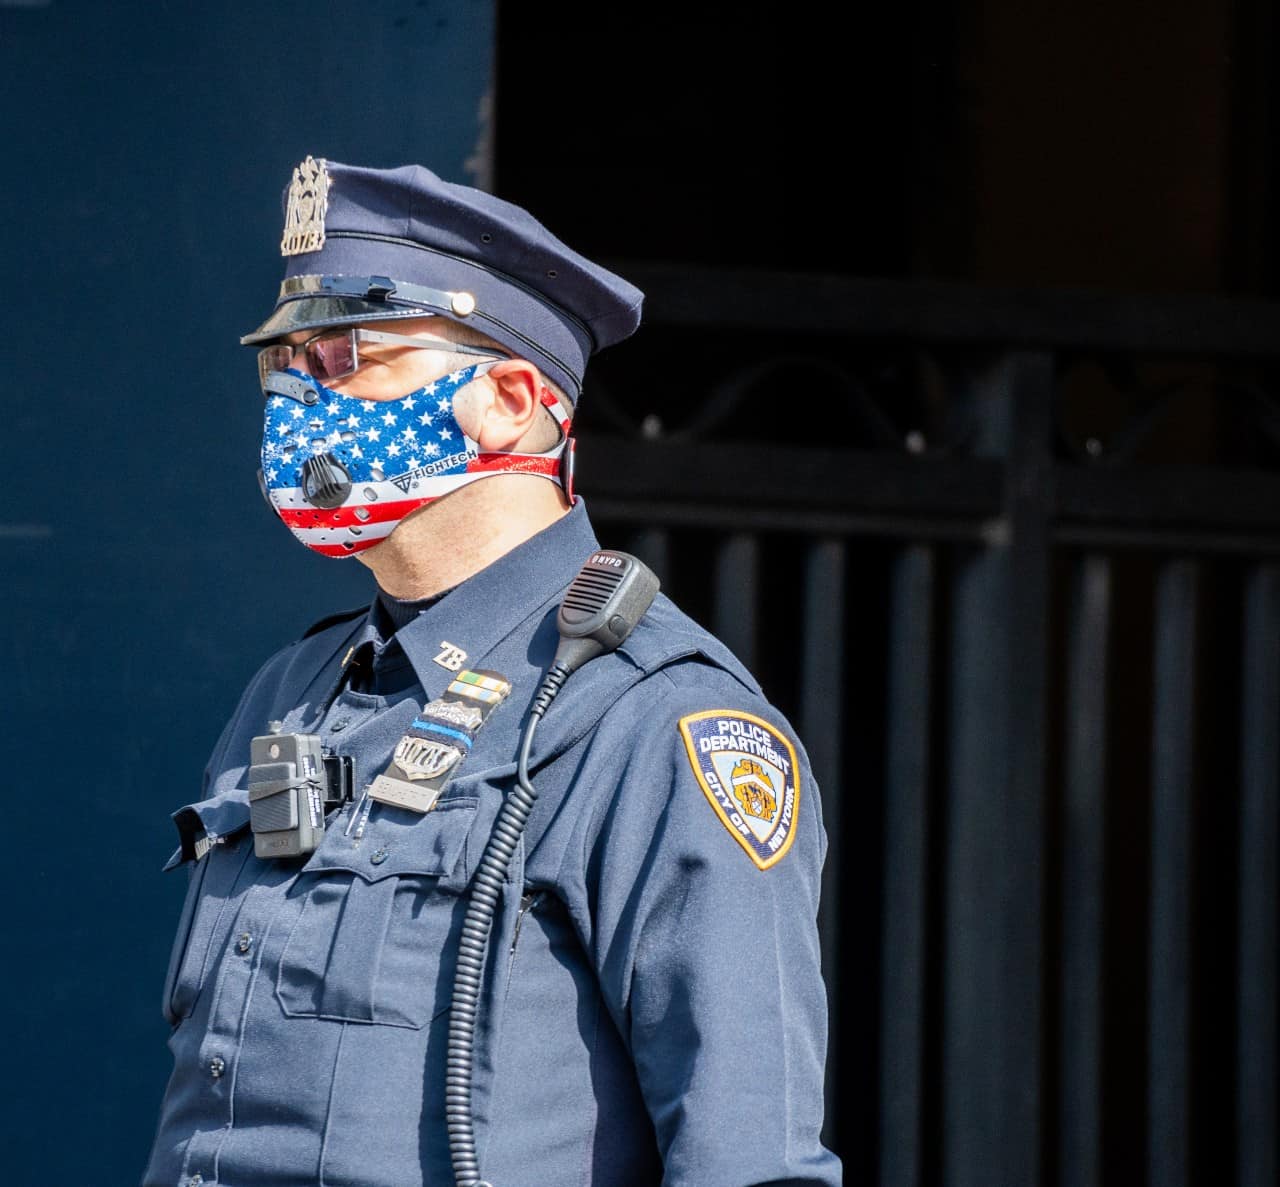 A police officer wearing a mask with the American flag on it.